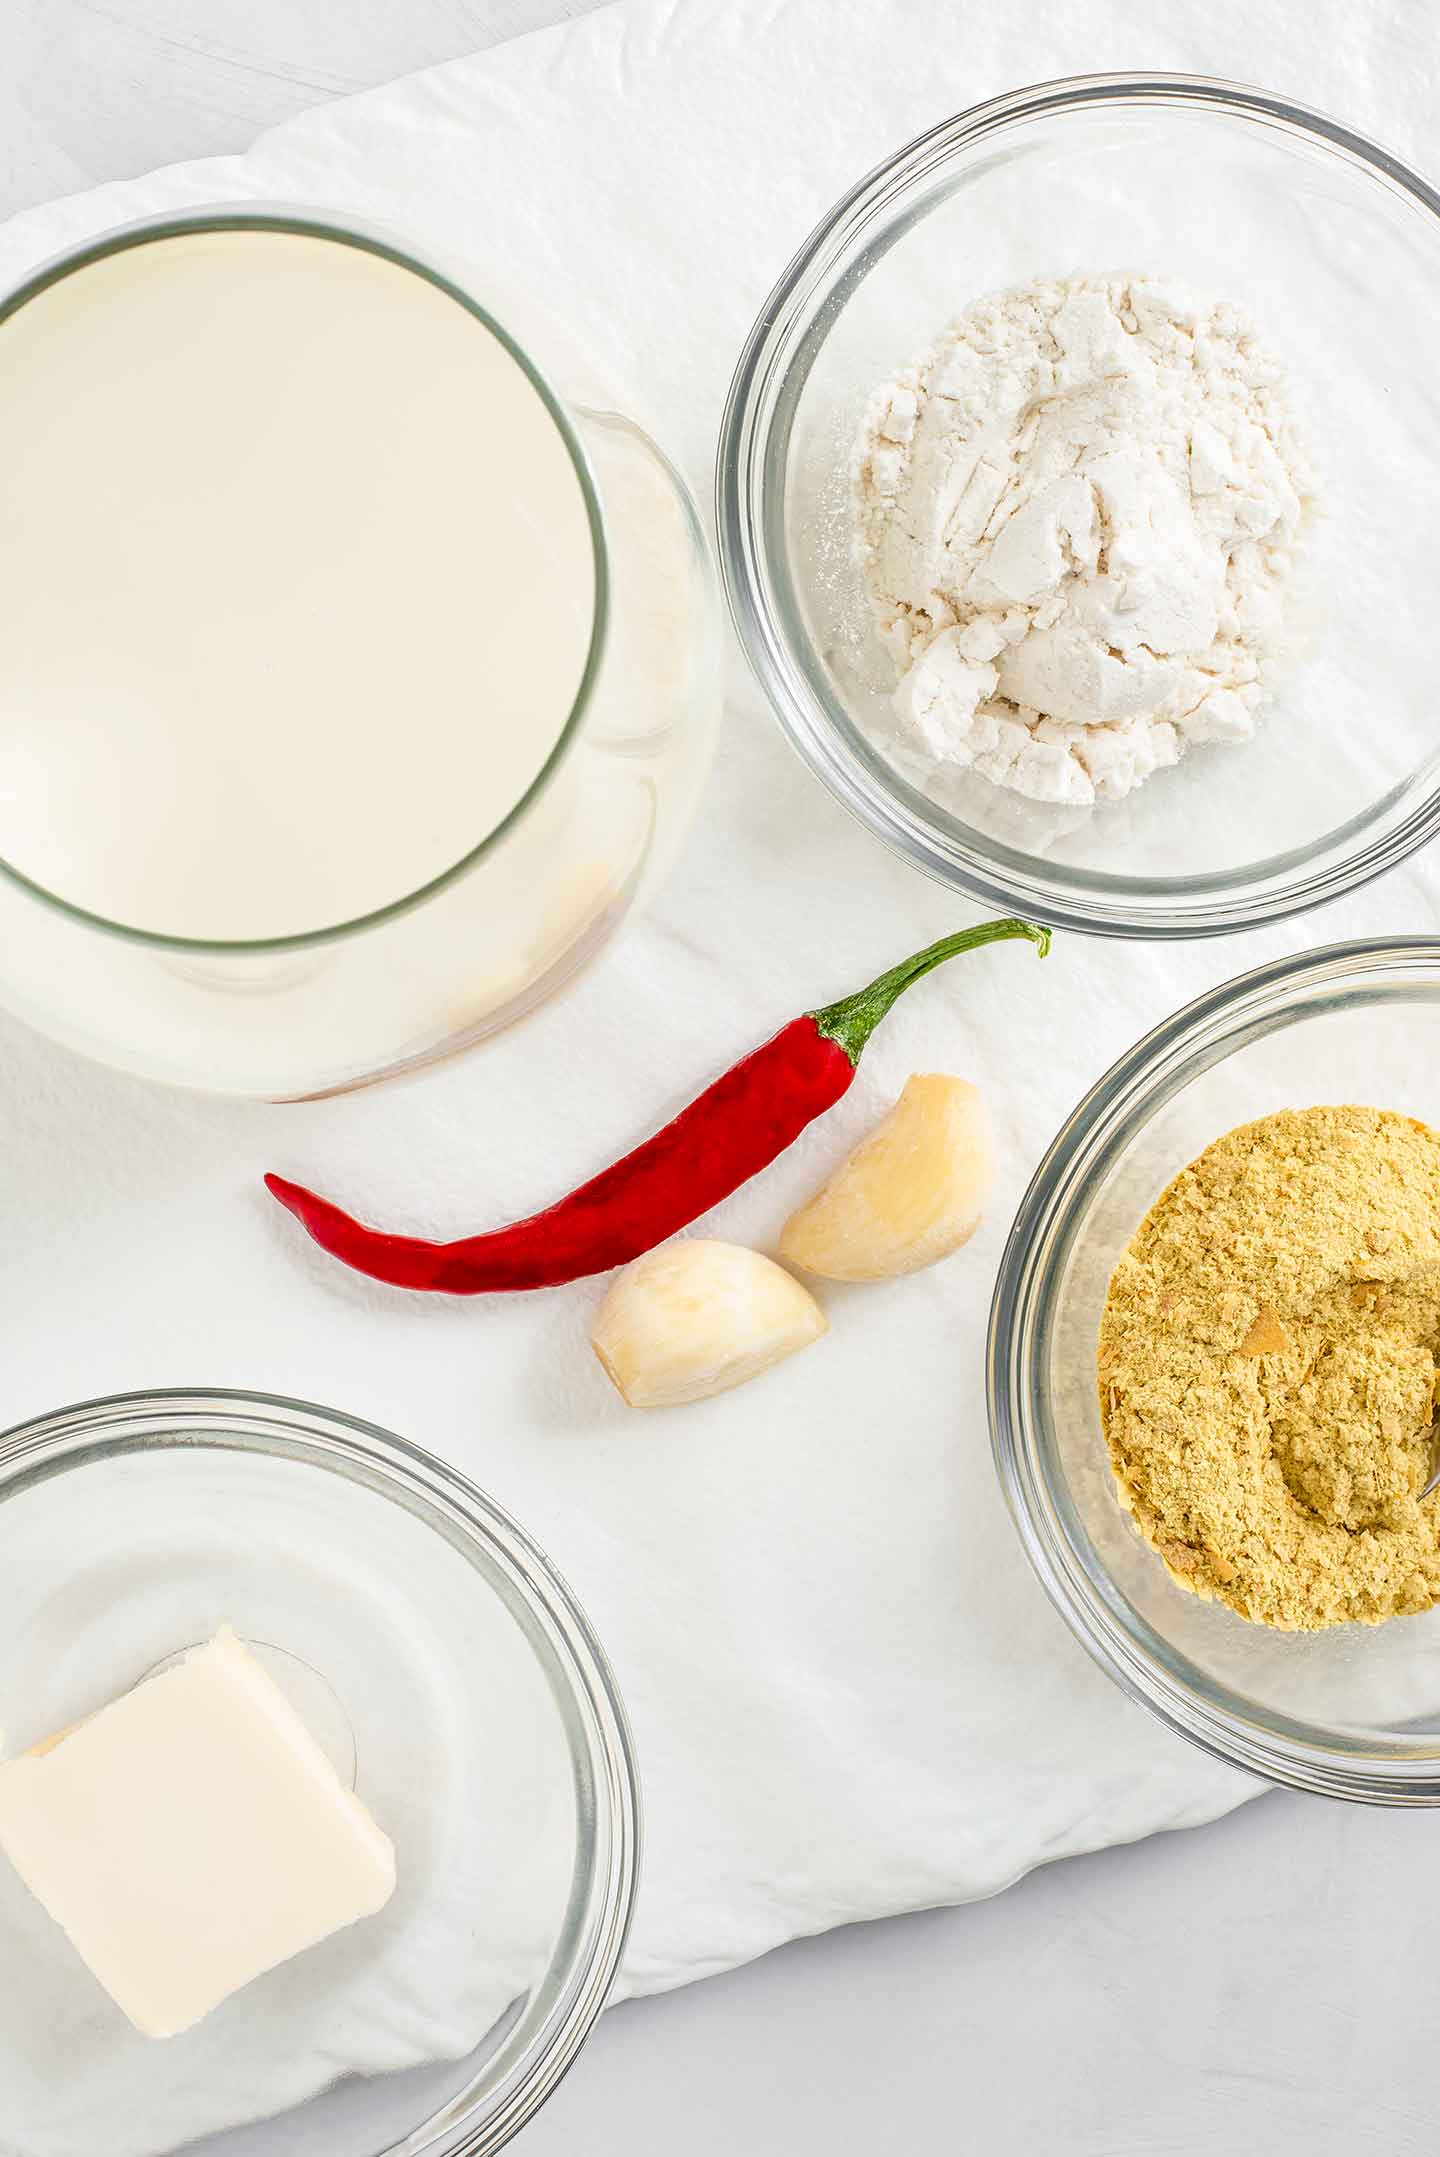 Top down view of vegan queso ingredients. A glass of milk, a small bowl of flour, nutritional yeast, butter, garlic cloves and a hot red chilli pepper.